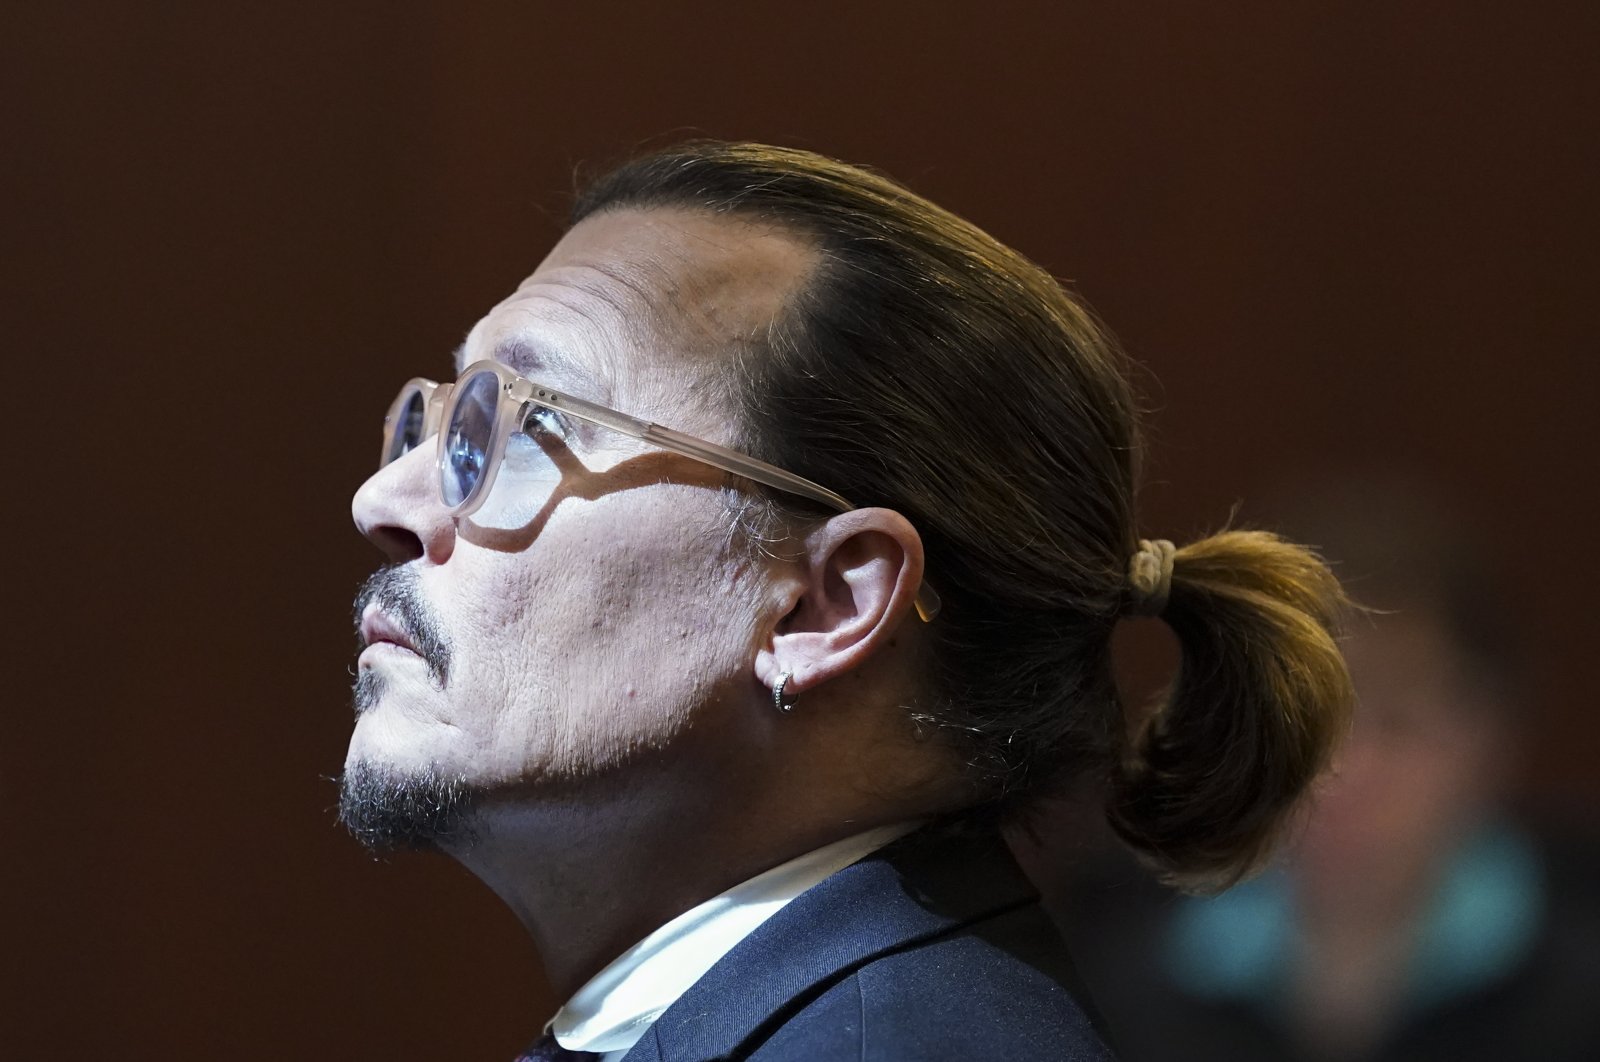 Actor Johnny Depp looks on during the defamation trial against ex-wife Amber Heard at the Fairfax County Circuit Courthouse in Fairfax, Virginia, U.S., May 18, 2022. (EPA Photo)